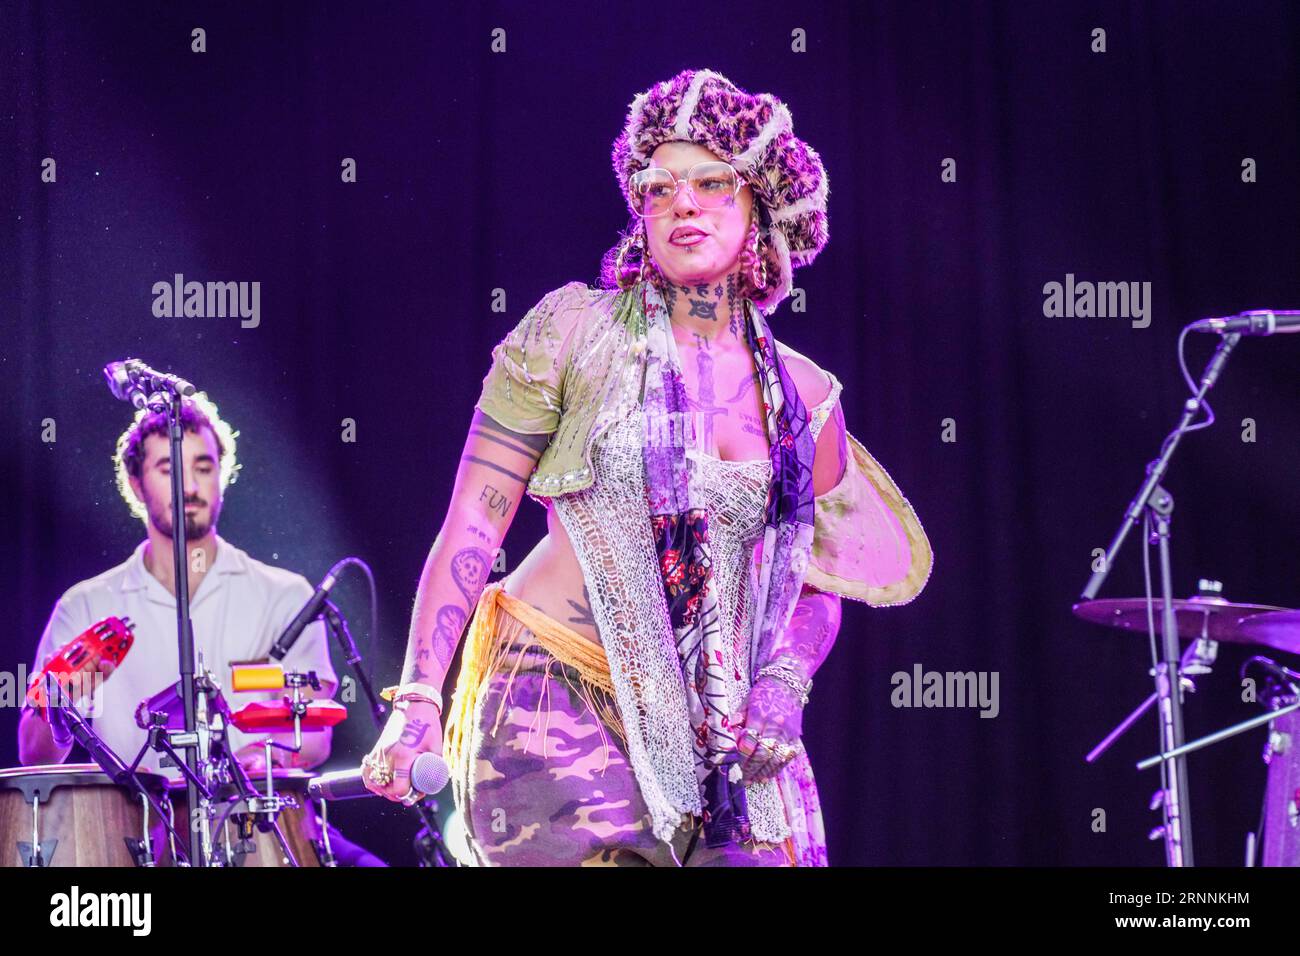 Dorset, UK. Friday, 1 September, 2023. Greentea Peng performing at the 2023 edition of the End of the Road festival at Larmer Tree Gardens in Dorset. Photo date: Friday, September 1, 2023. Photo credit should read: Richard Gray/Alamy Live News Stock Photo